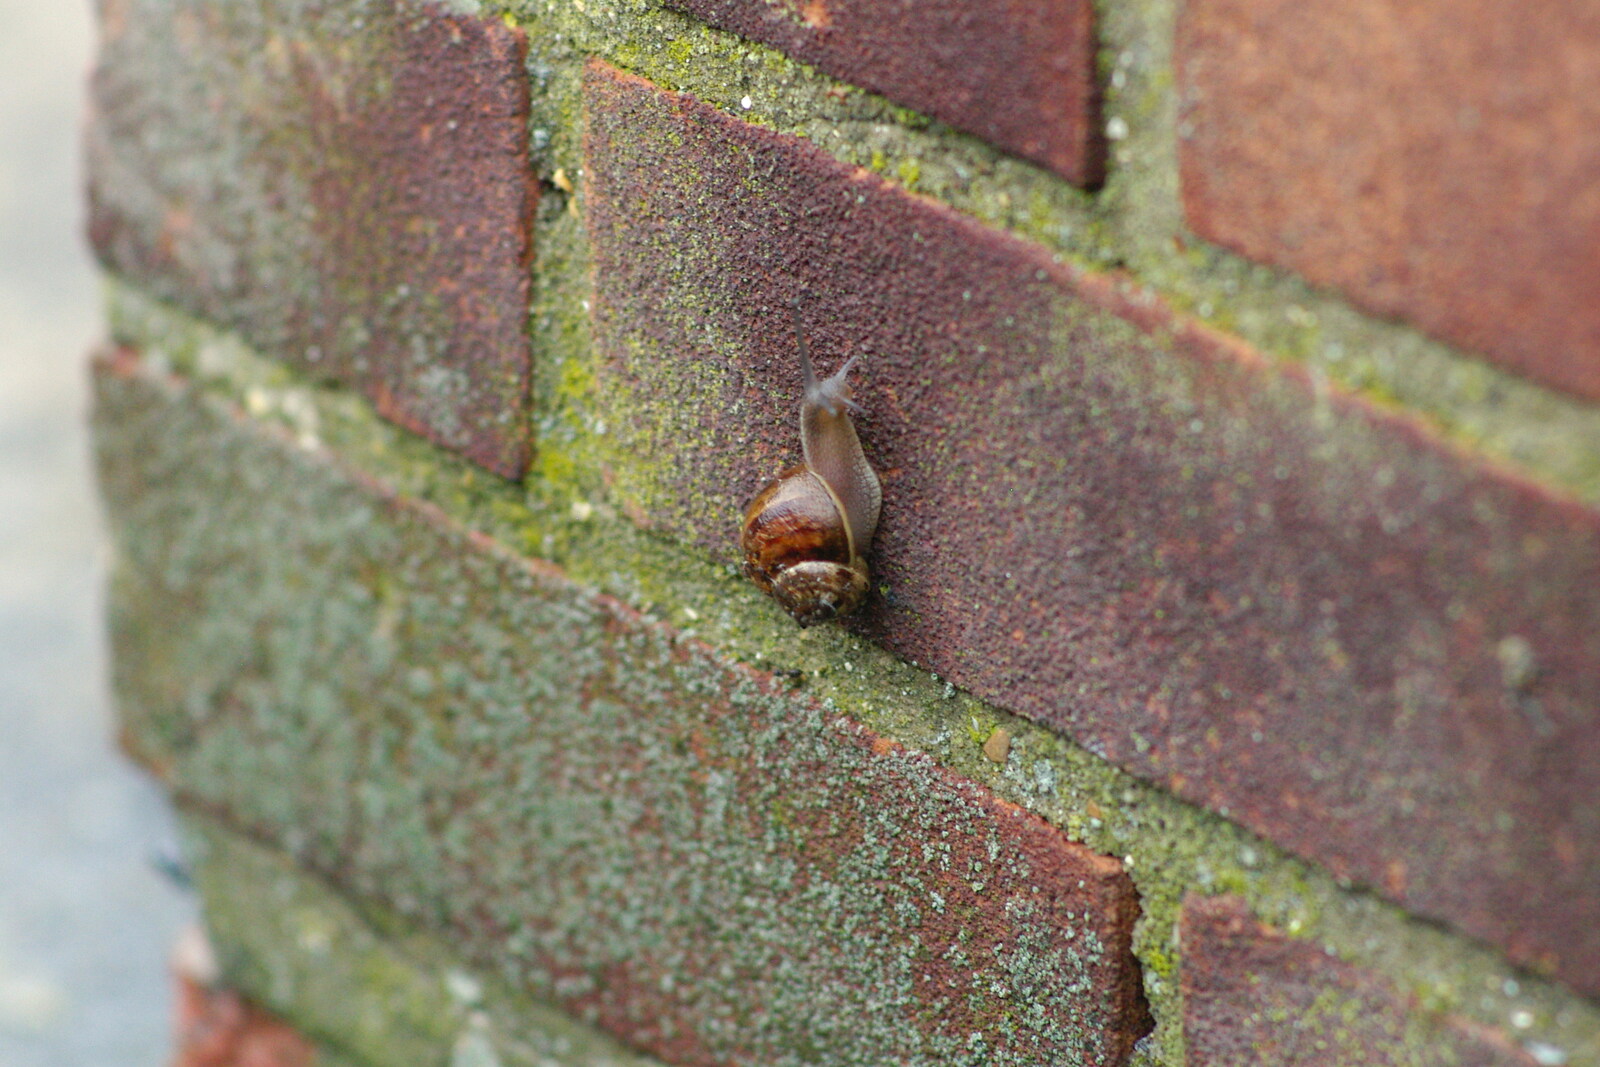 A snail scales a wall from Coldplay Live at Crystal Palace, Diss Publishing and Molluscs, Diss and London - 28th June 2005